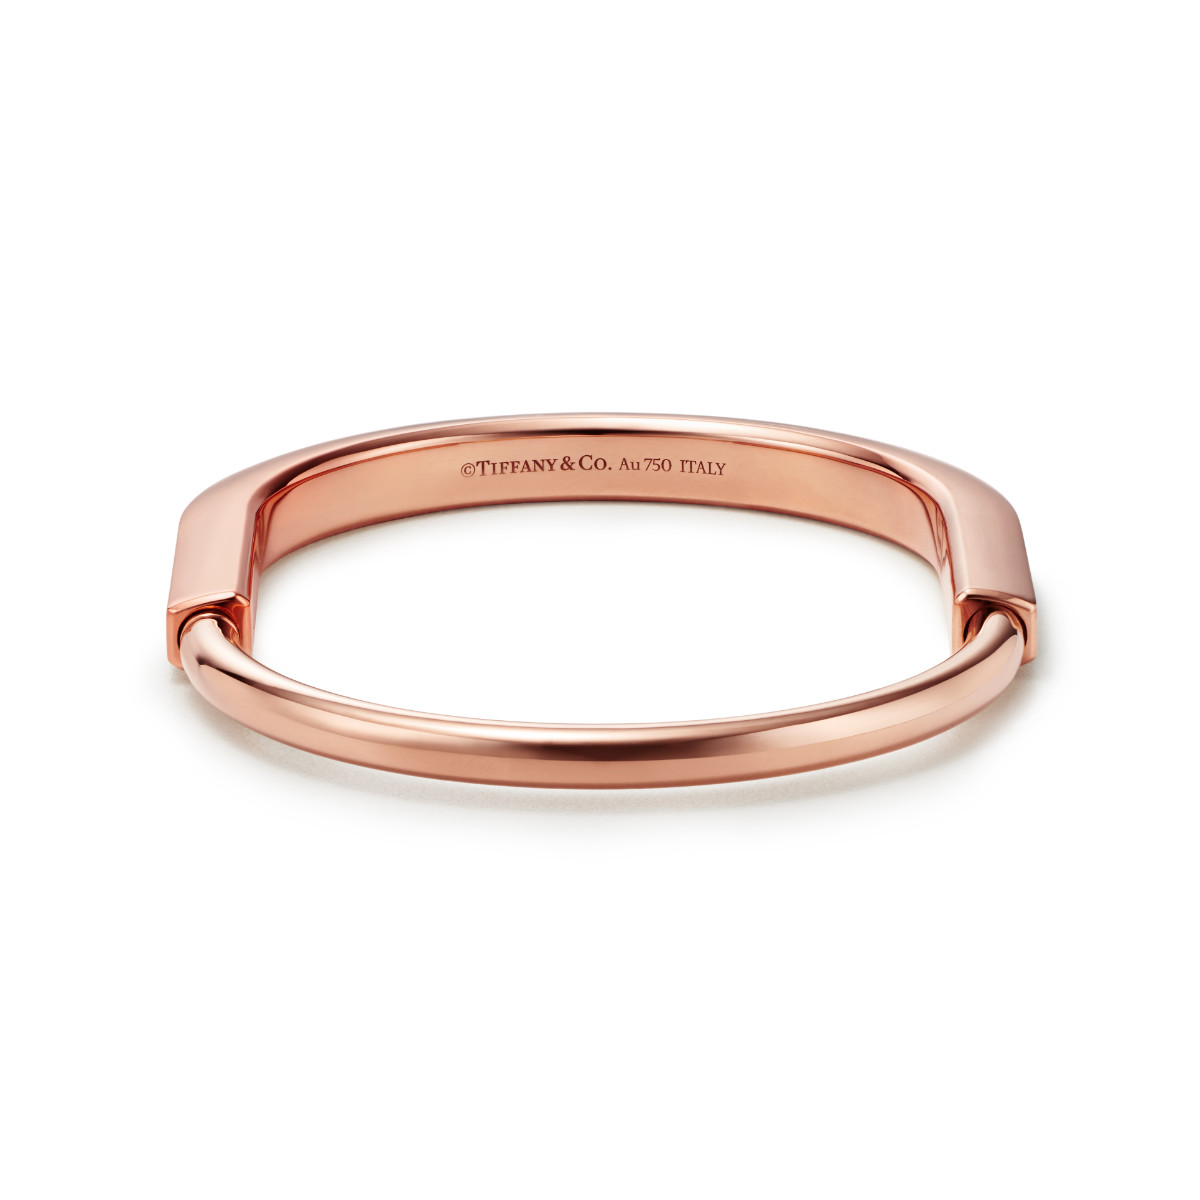 Tiffany & Co. Introduced Its Latest Jewelry Collection: Tiffany Lock